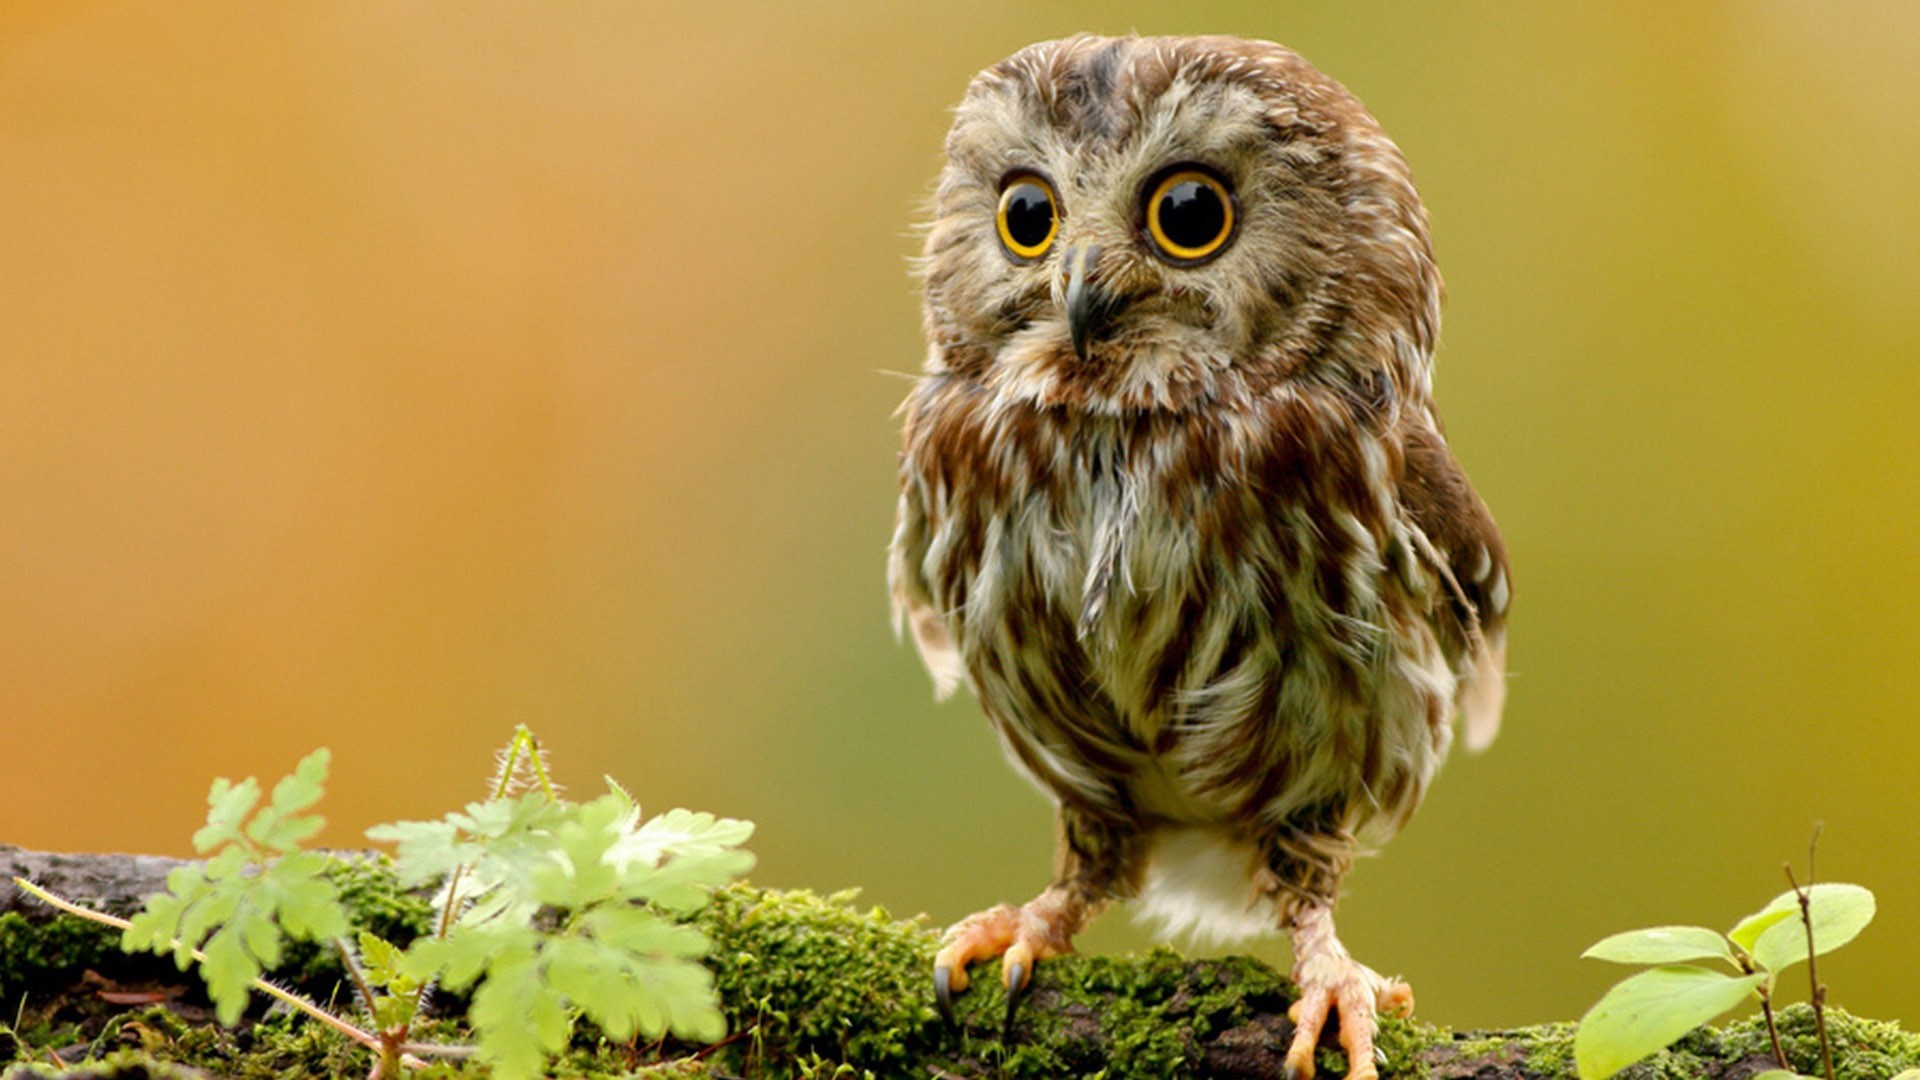 Explore the World of Owls with 500+ Desktop backgrounds owls for Your Computer and Mobile